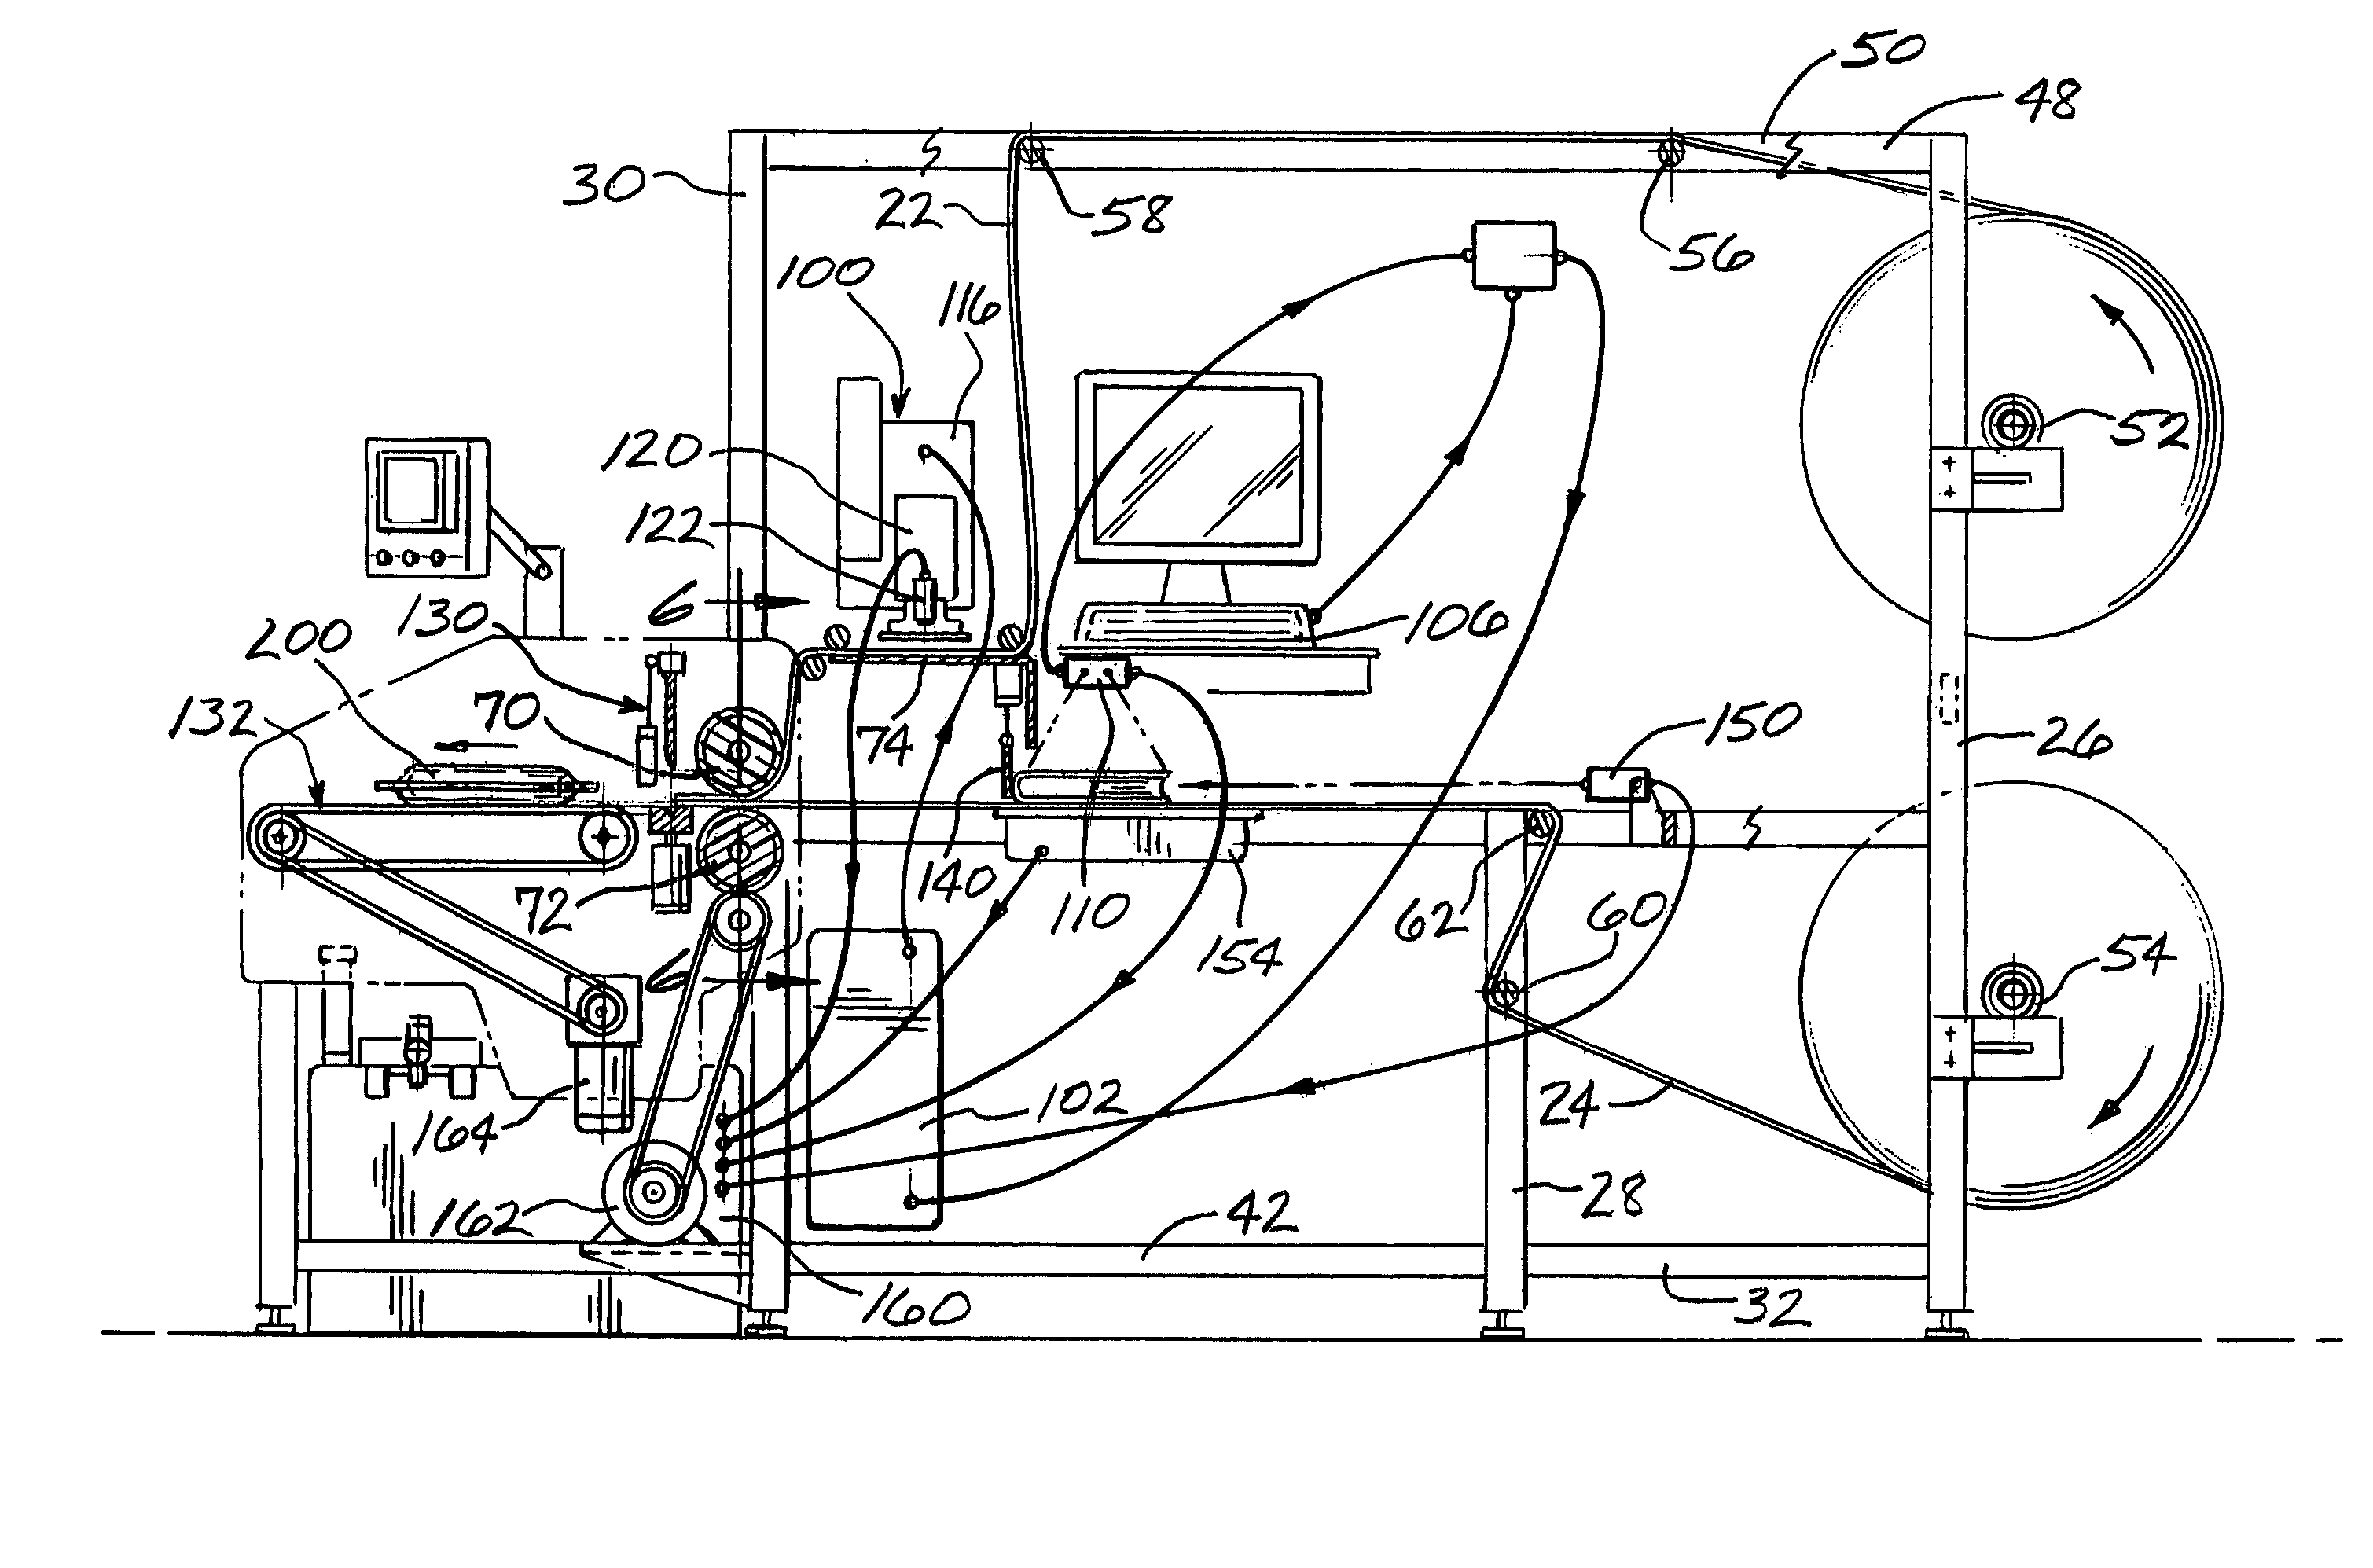 Packaging machine and method